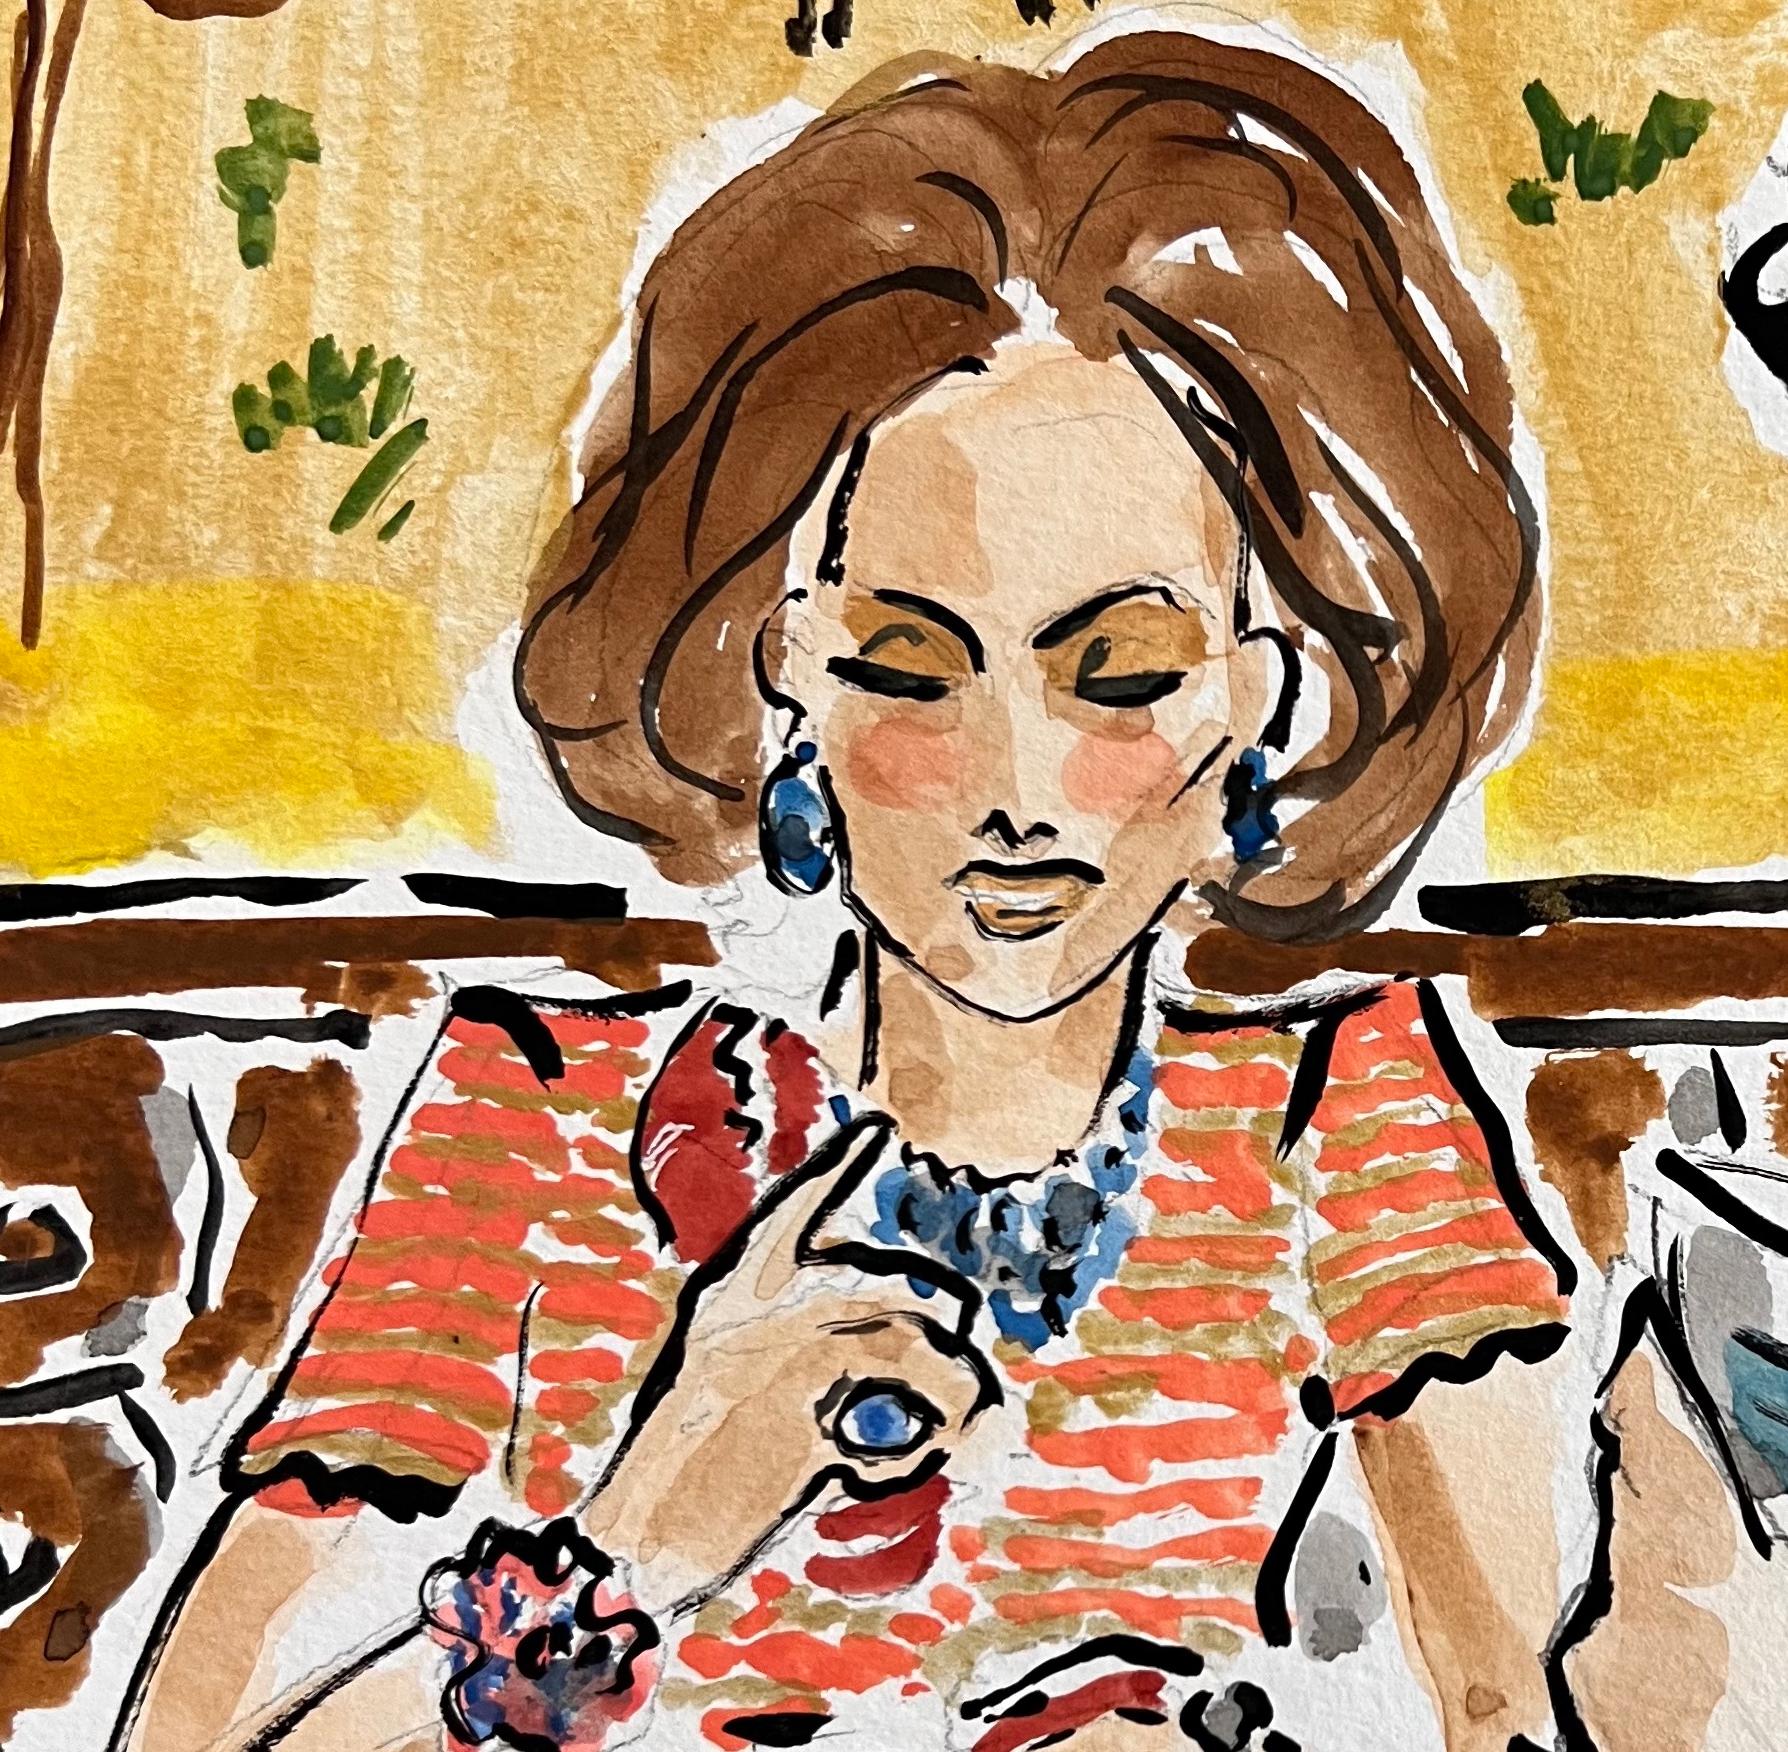 Lobster dinner at the Carlyle, Watercolor social scene New York City - Art by Manuel Santelices